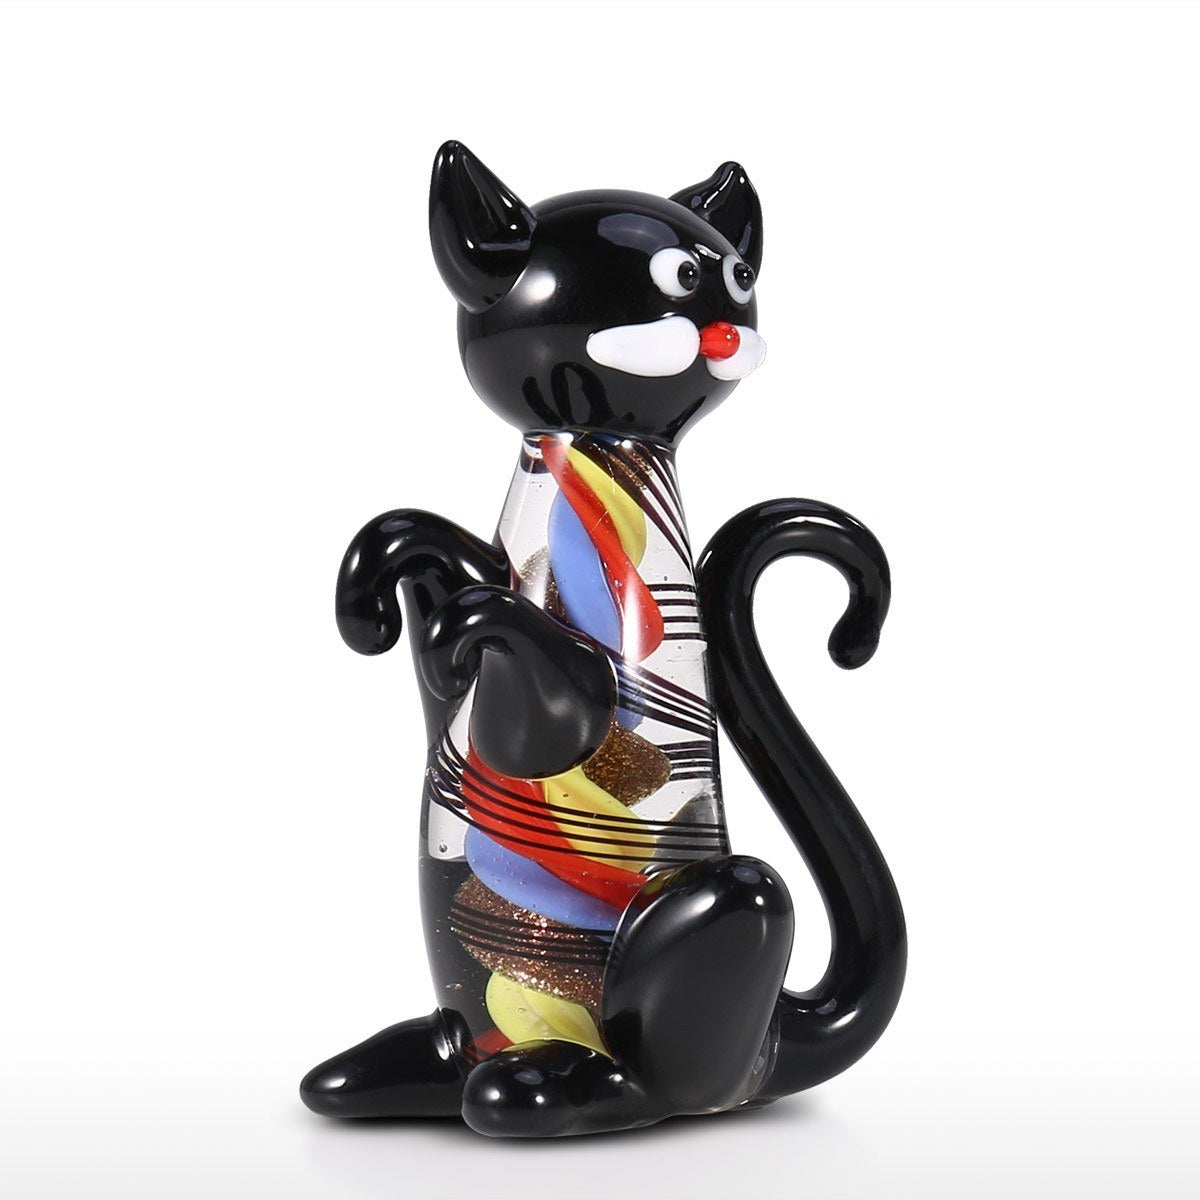 Black Cat Christmas Ornament Decor & Gifts for Cat Lovers by Angel